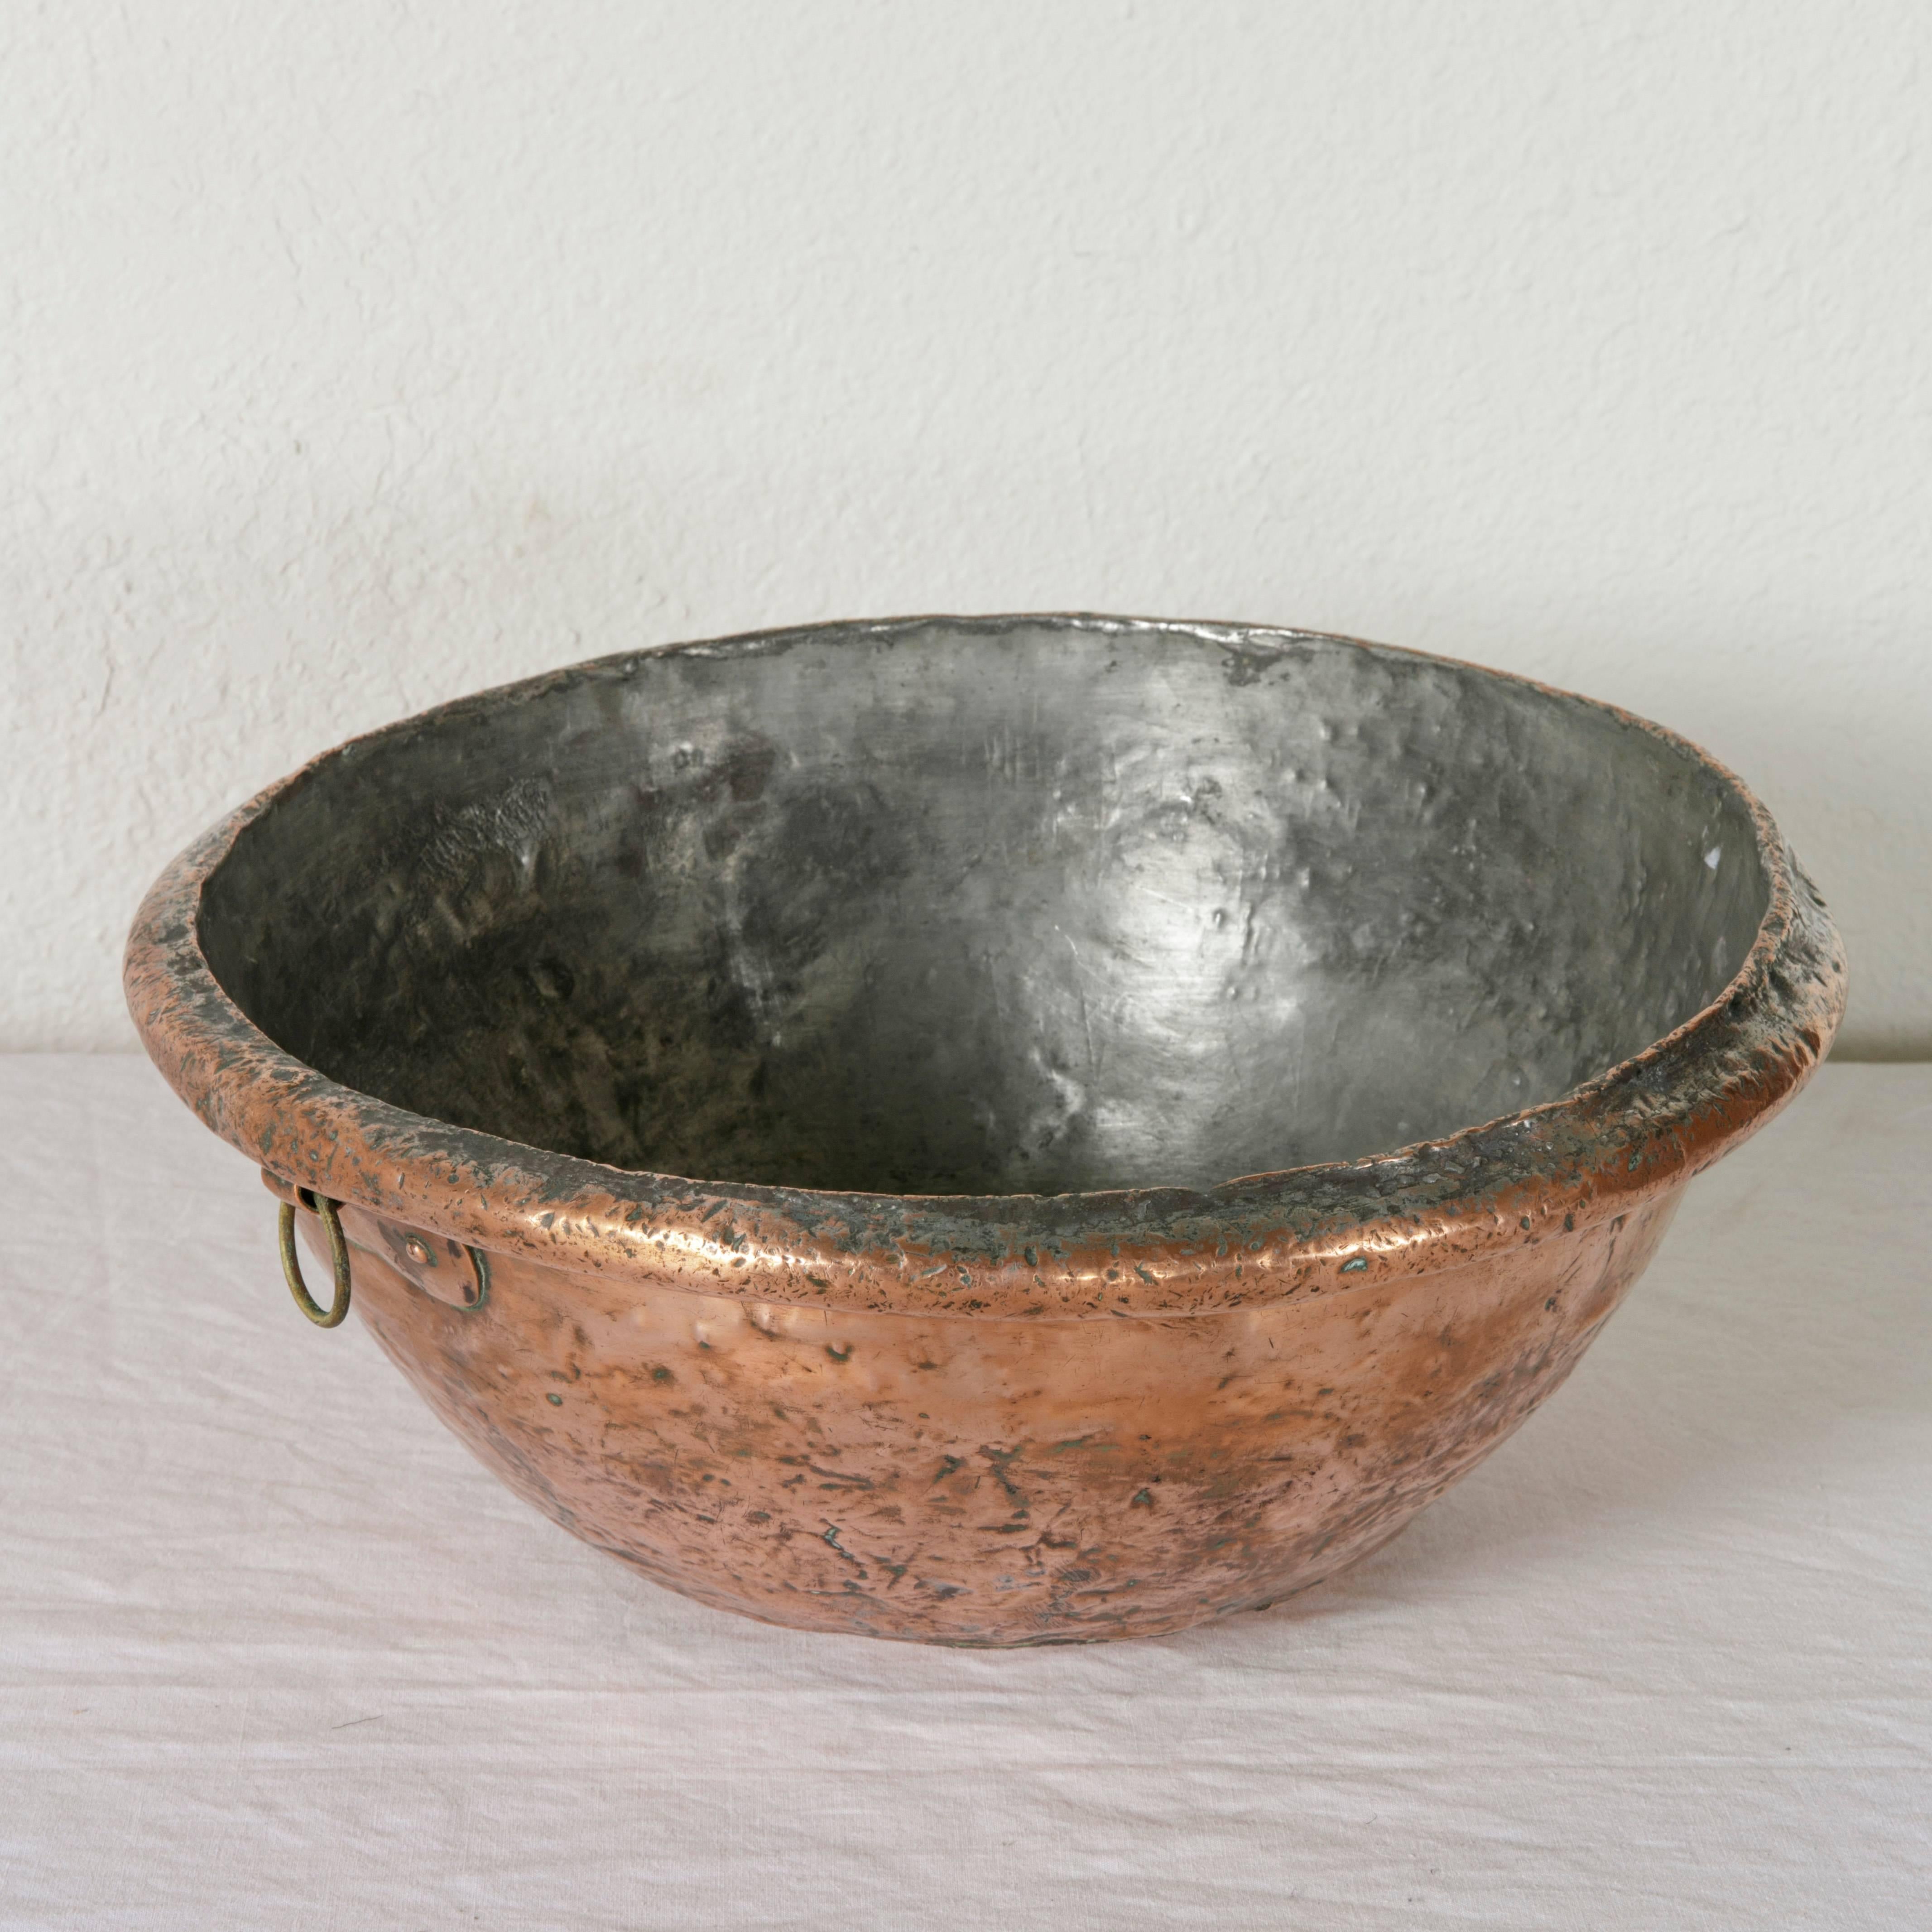 A handcrafted piece from the 18th century, this hand-hammered copper mixing bowl, known as a cul de poule in French, was originally used for beating eggs. With a diameter of 16 and a half inches and a depth of 6 inches, this bowl would be an